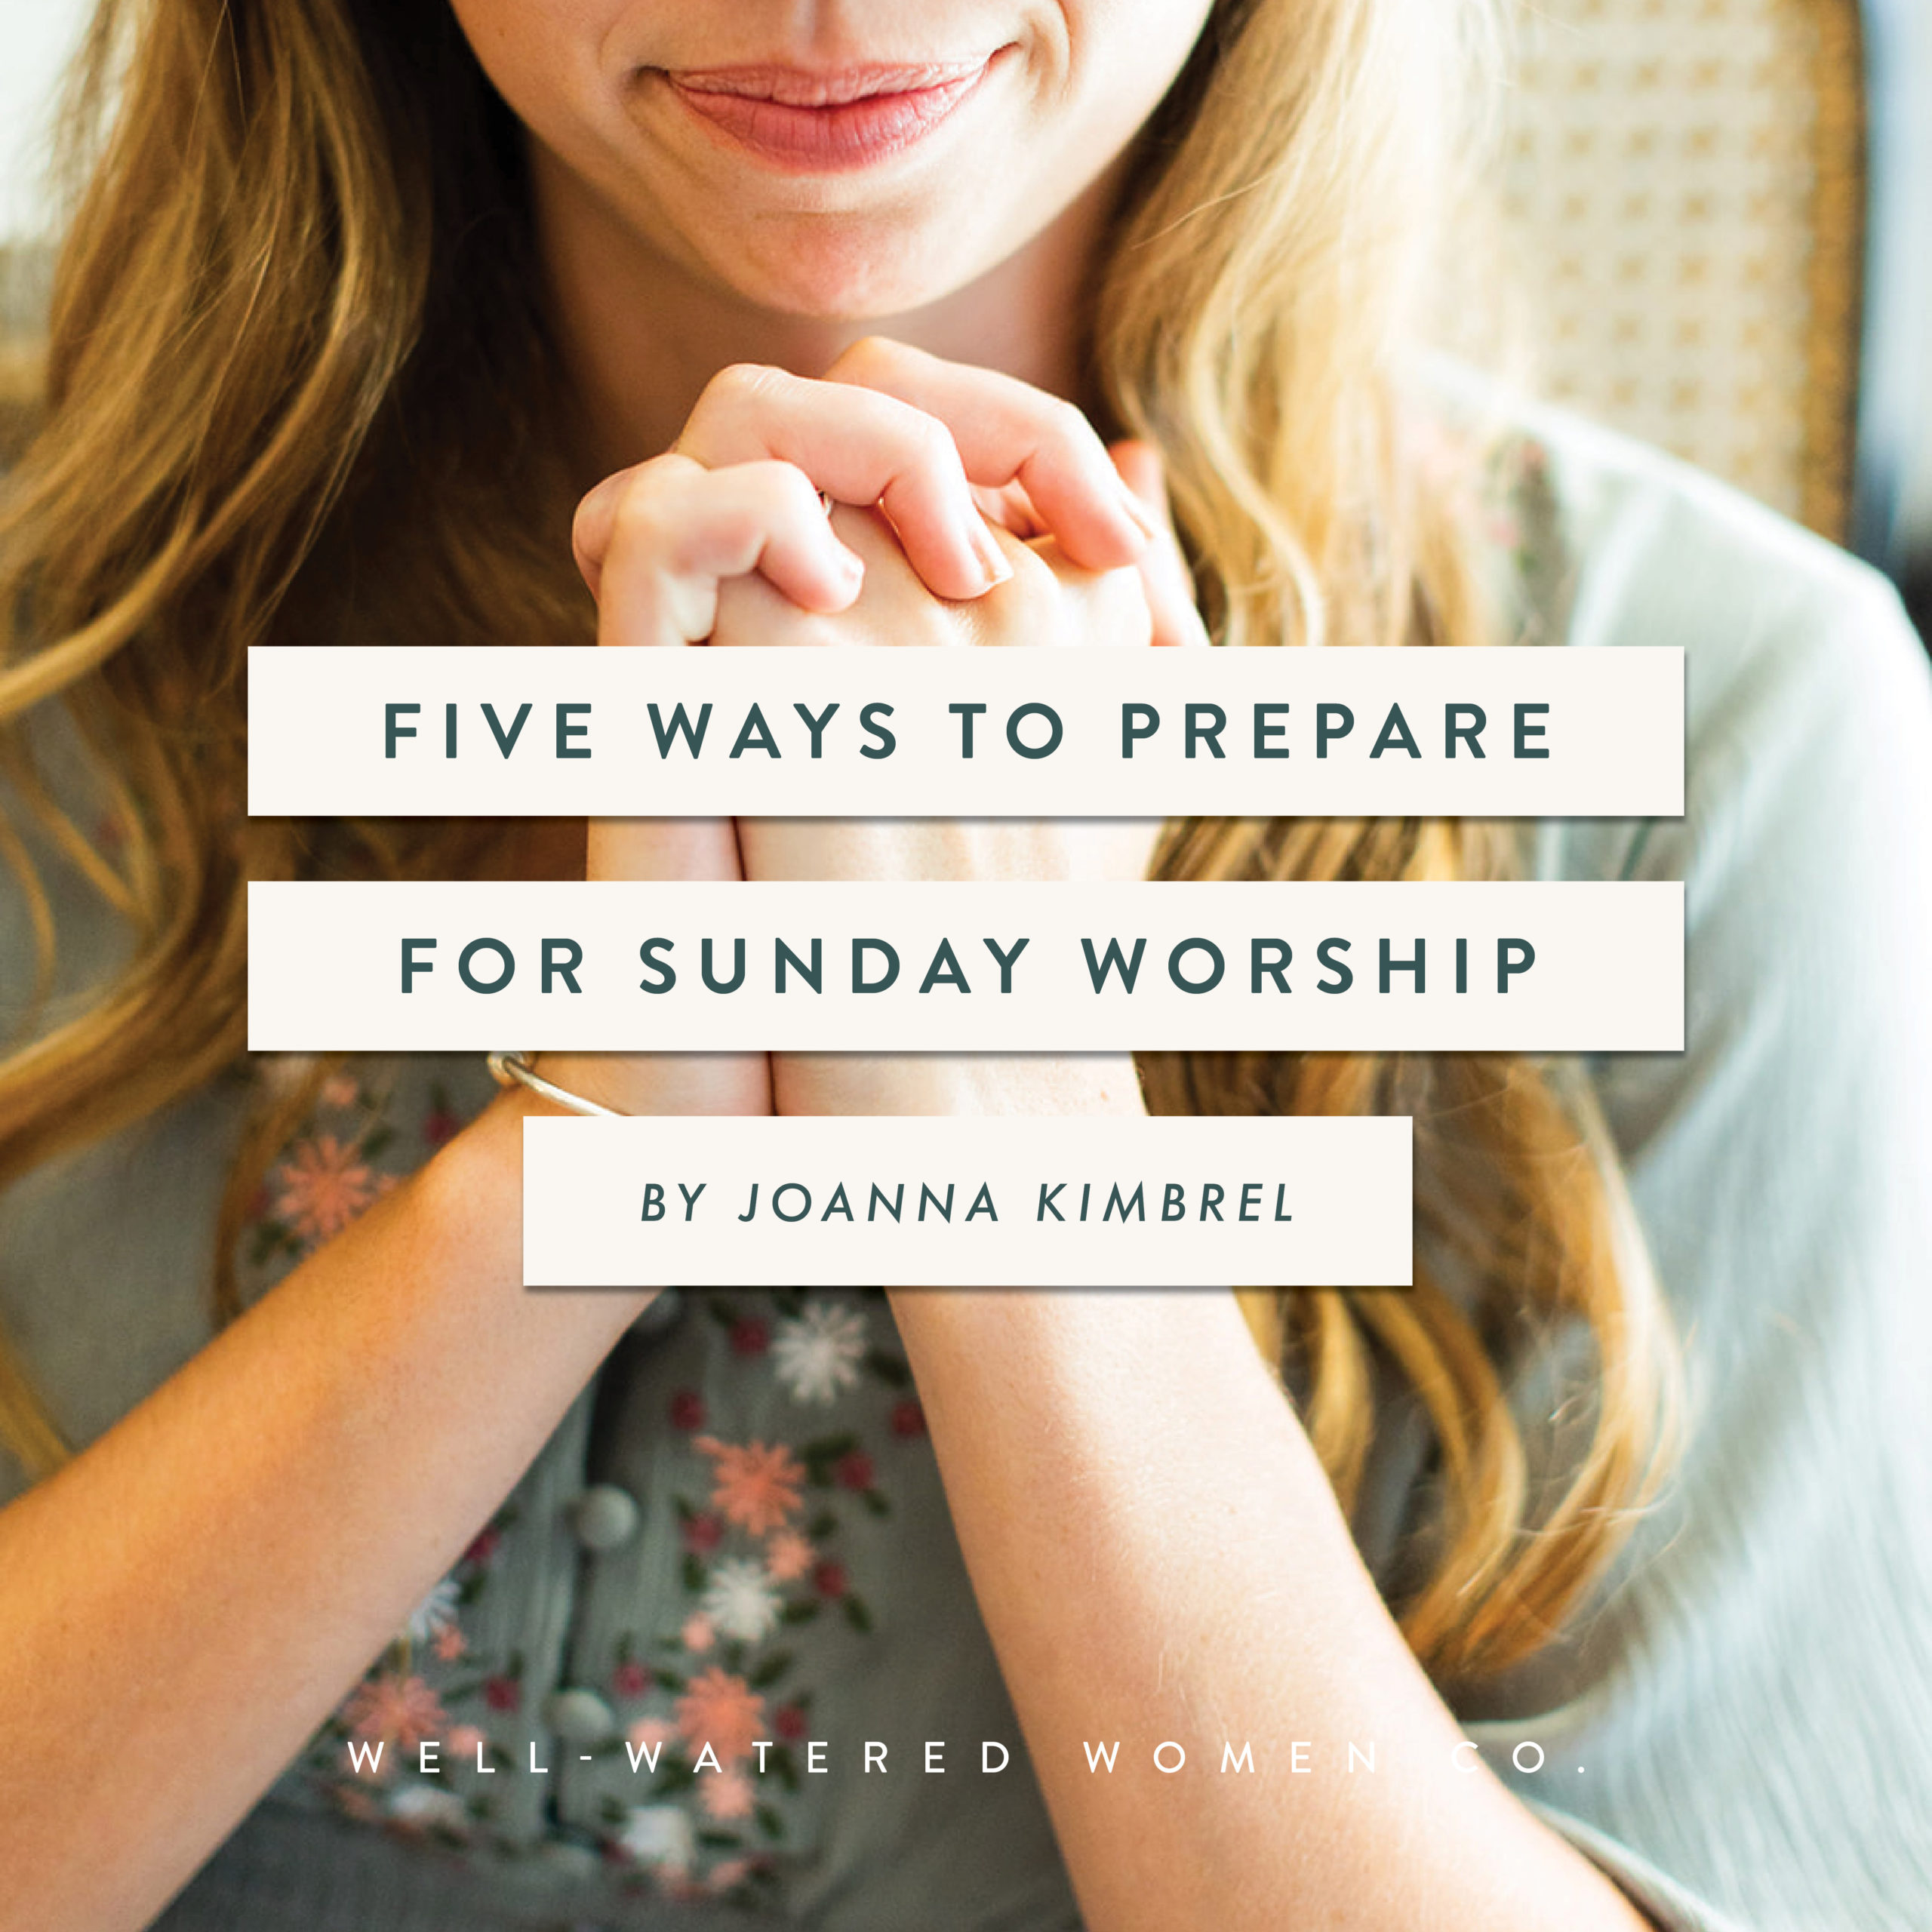 Five Ways to Prepare for Sunday Worship